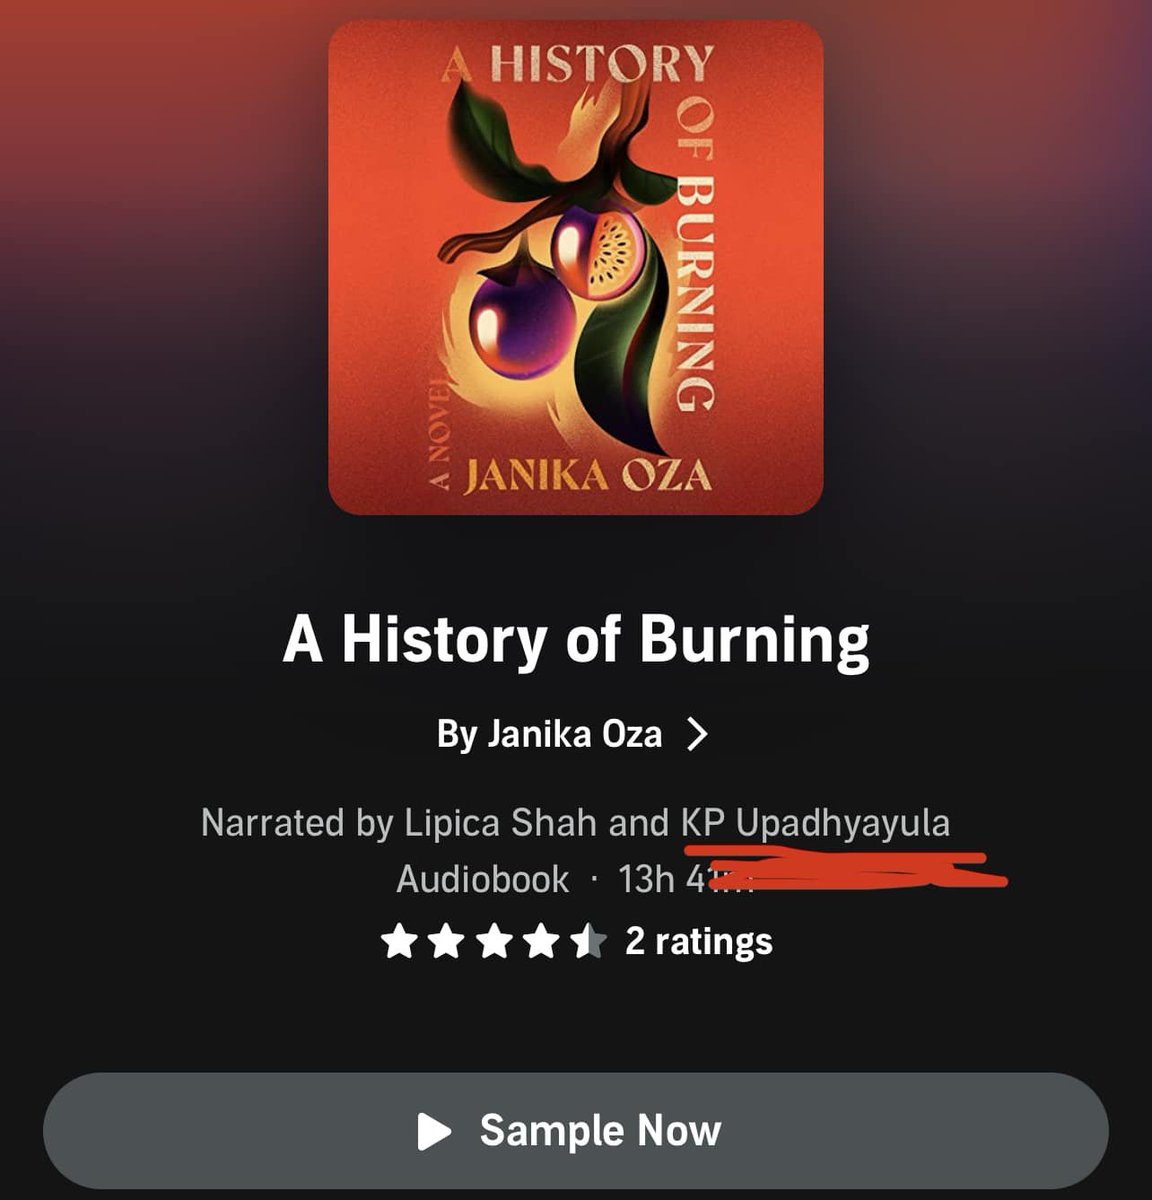 And it's here!! My biggest #AAPIHeritageMonth achievment! I'm proud to announce that I was a co-narrator/VO, w/ the amazing @LipicaShah, for 'A History of Burning' by the talented @JanikaOza! I can't express enough how honored I am to have been on such a project! #VoiceActor